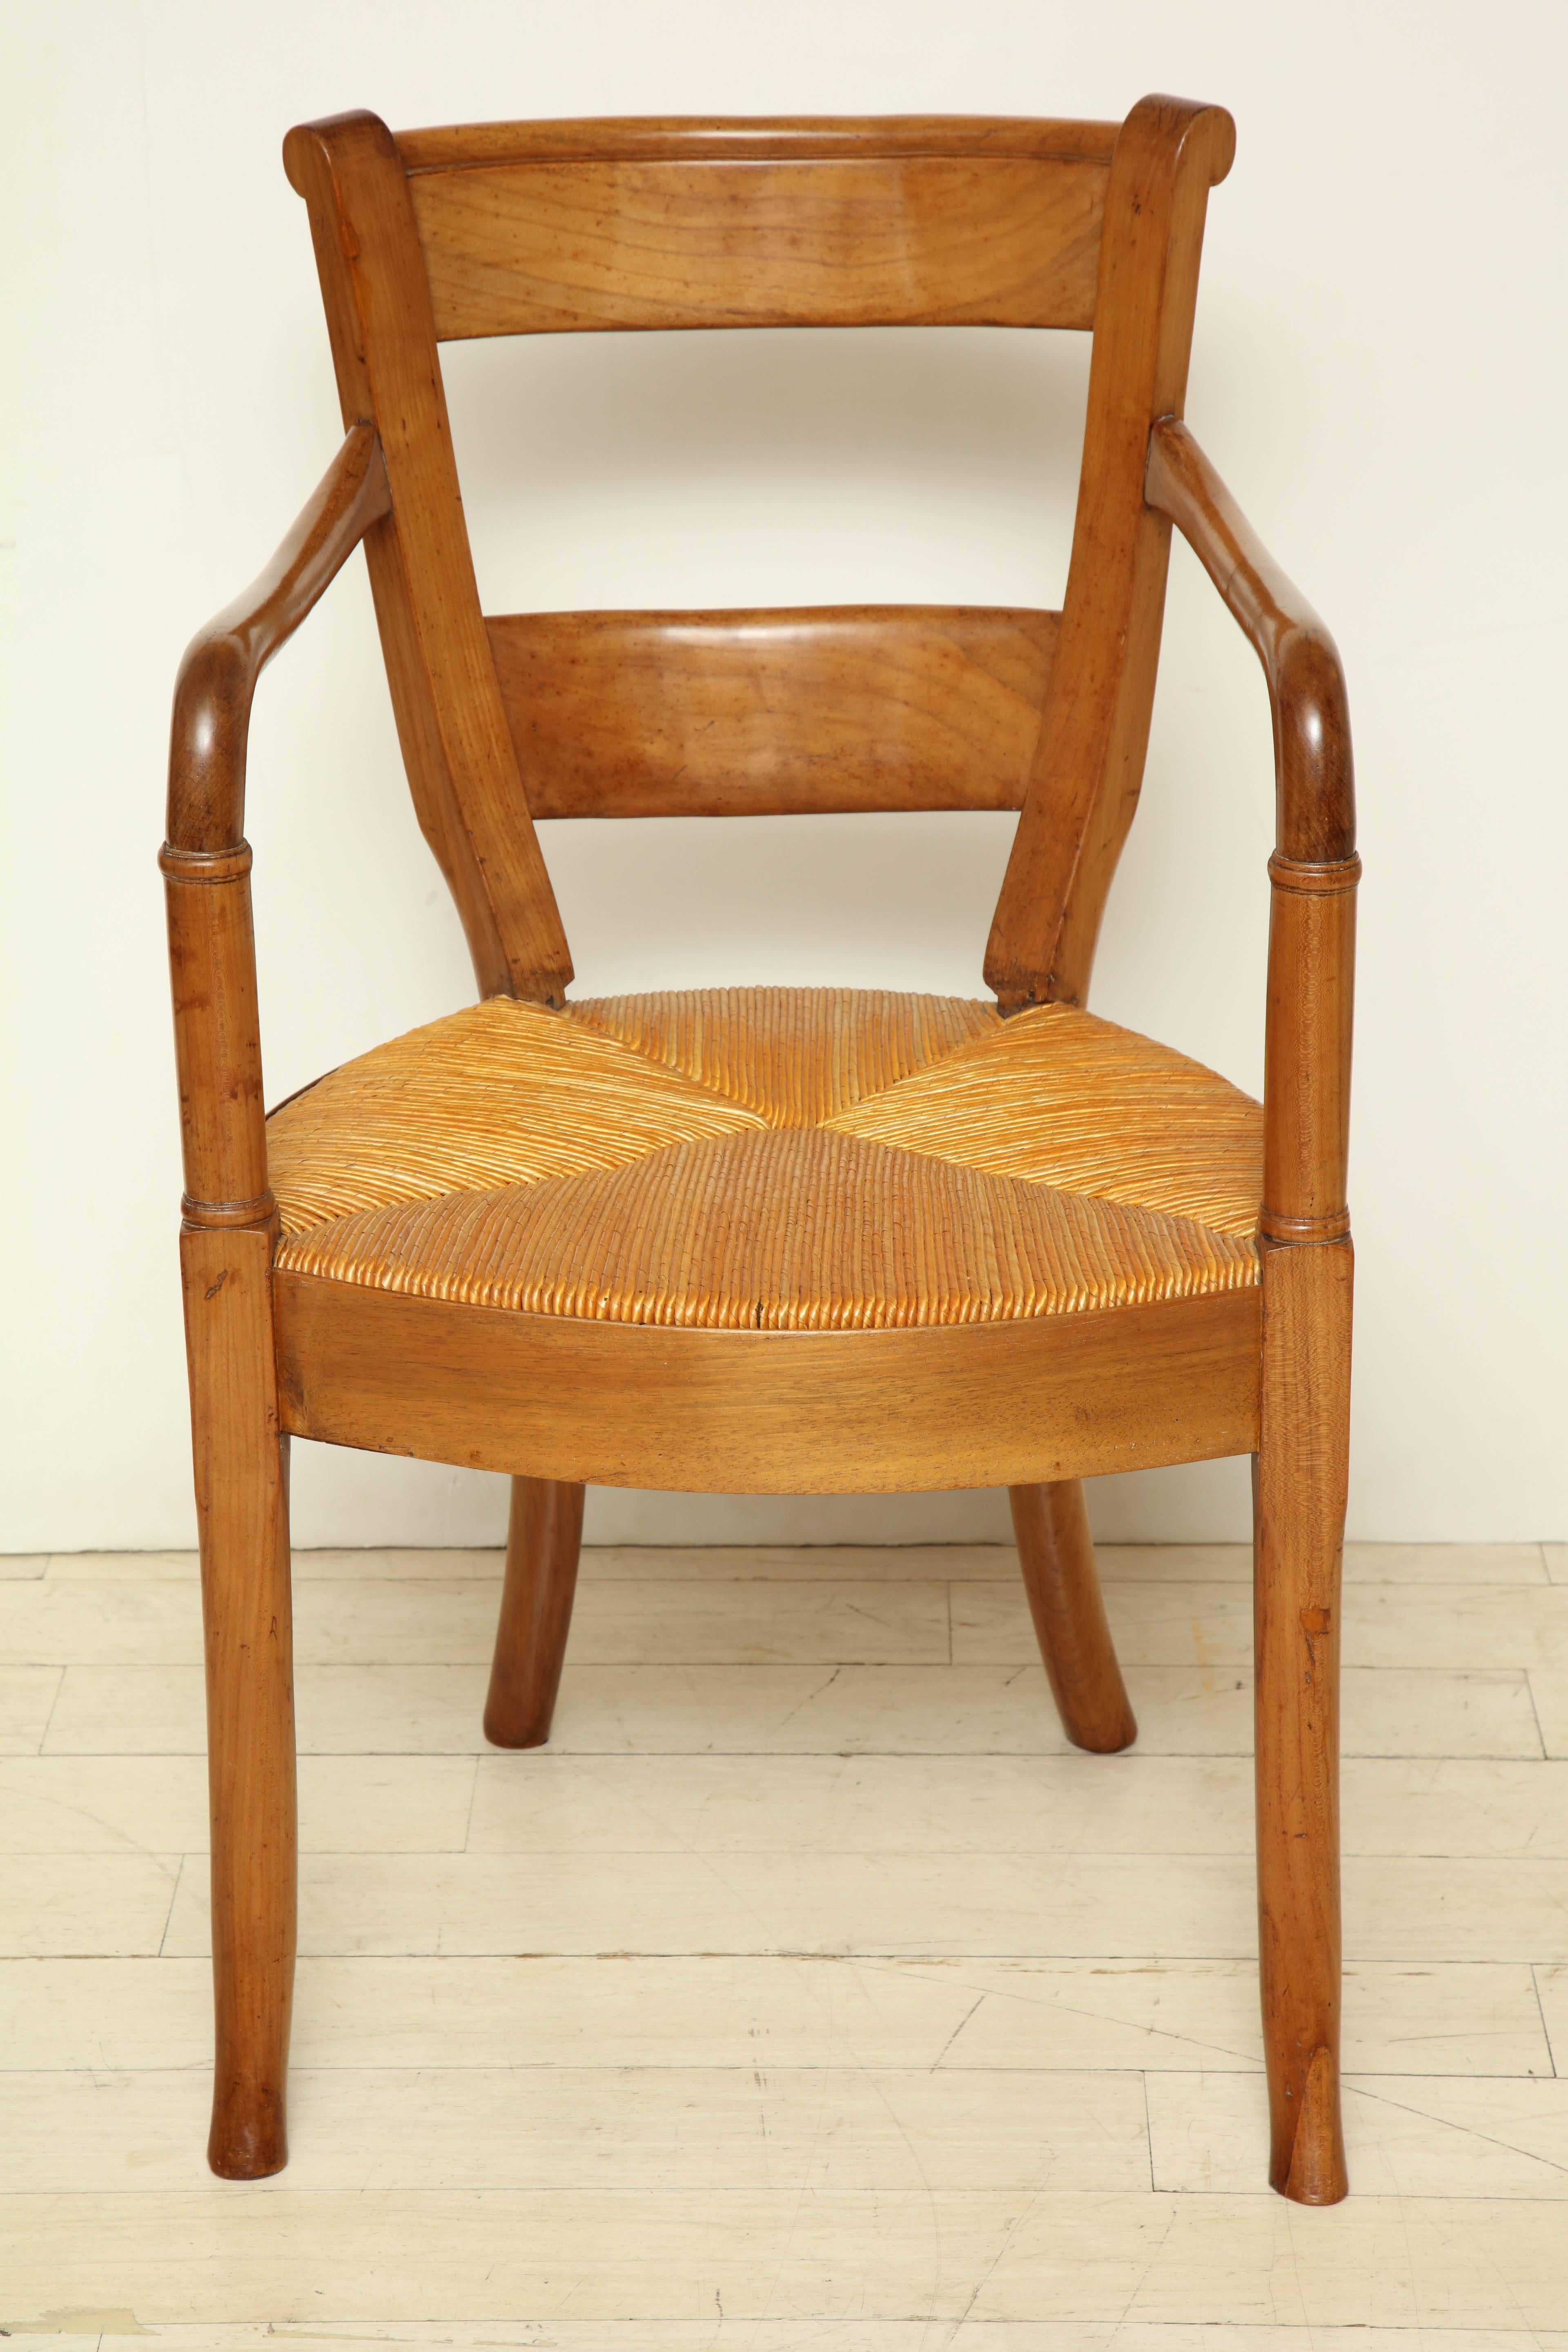 Provincial style blond walnut chair with curved arms and rush seat, France, circa 1880.